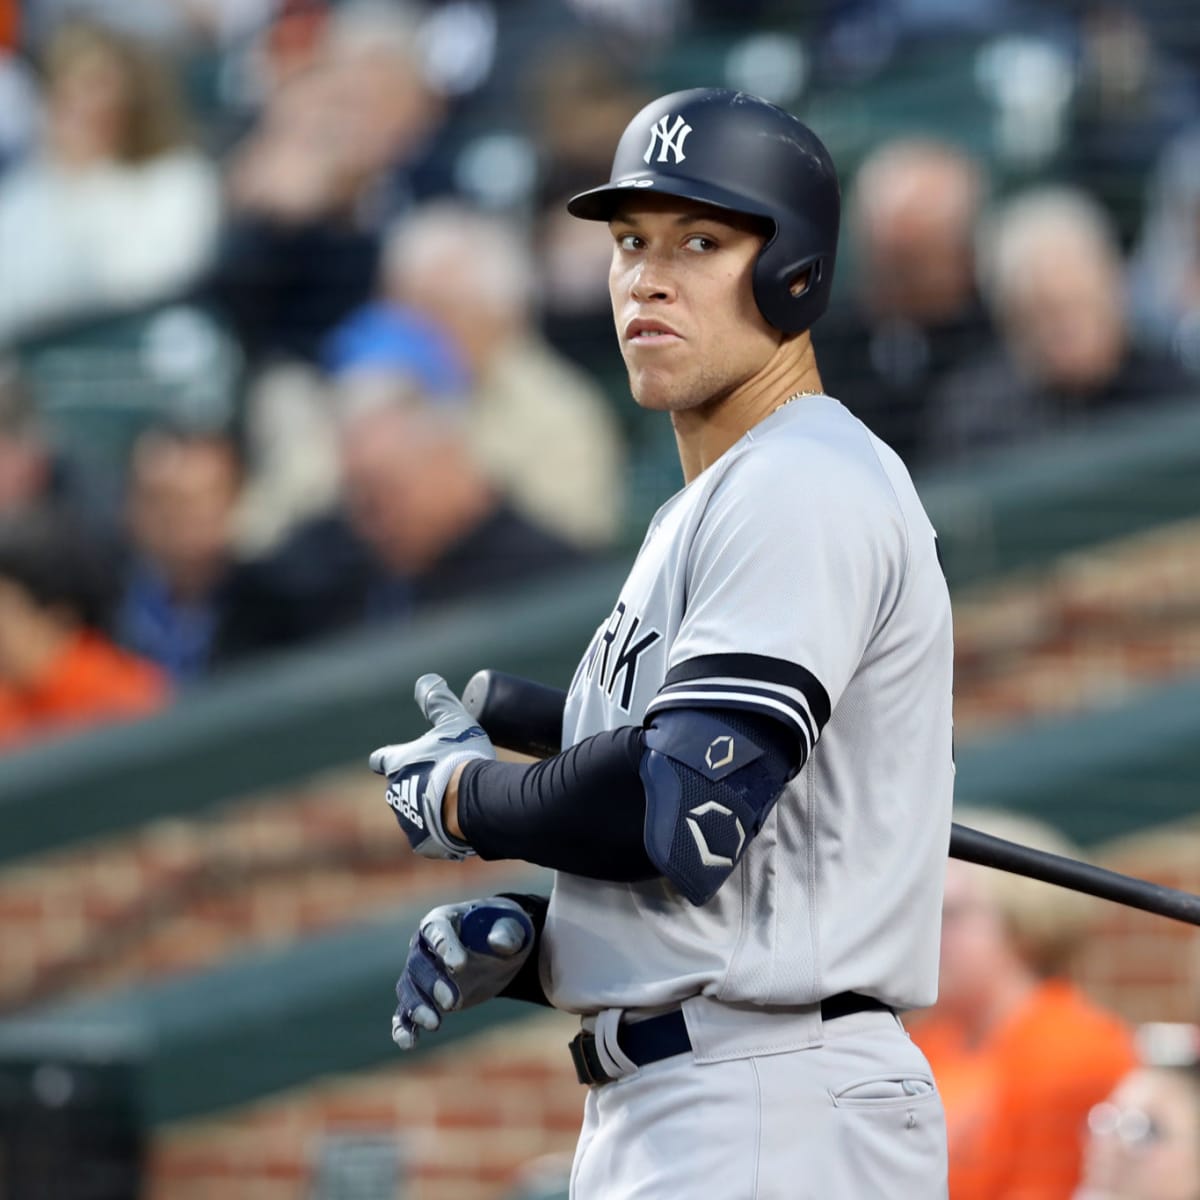 Yankees star upset with Astros cheating